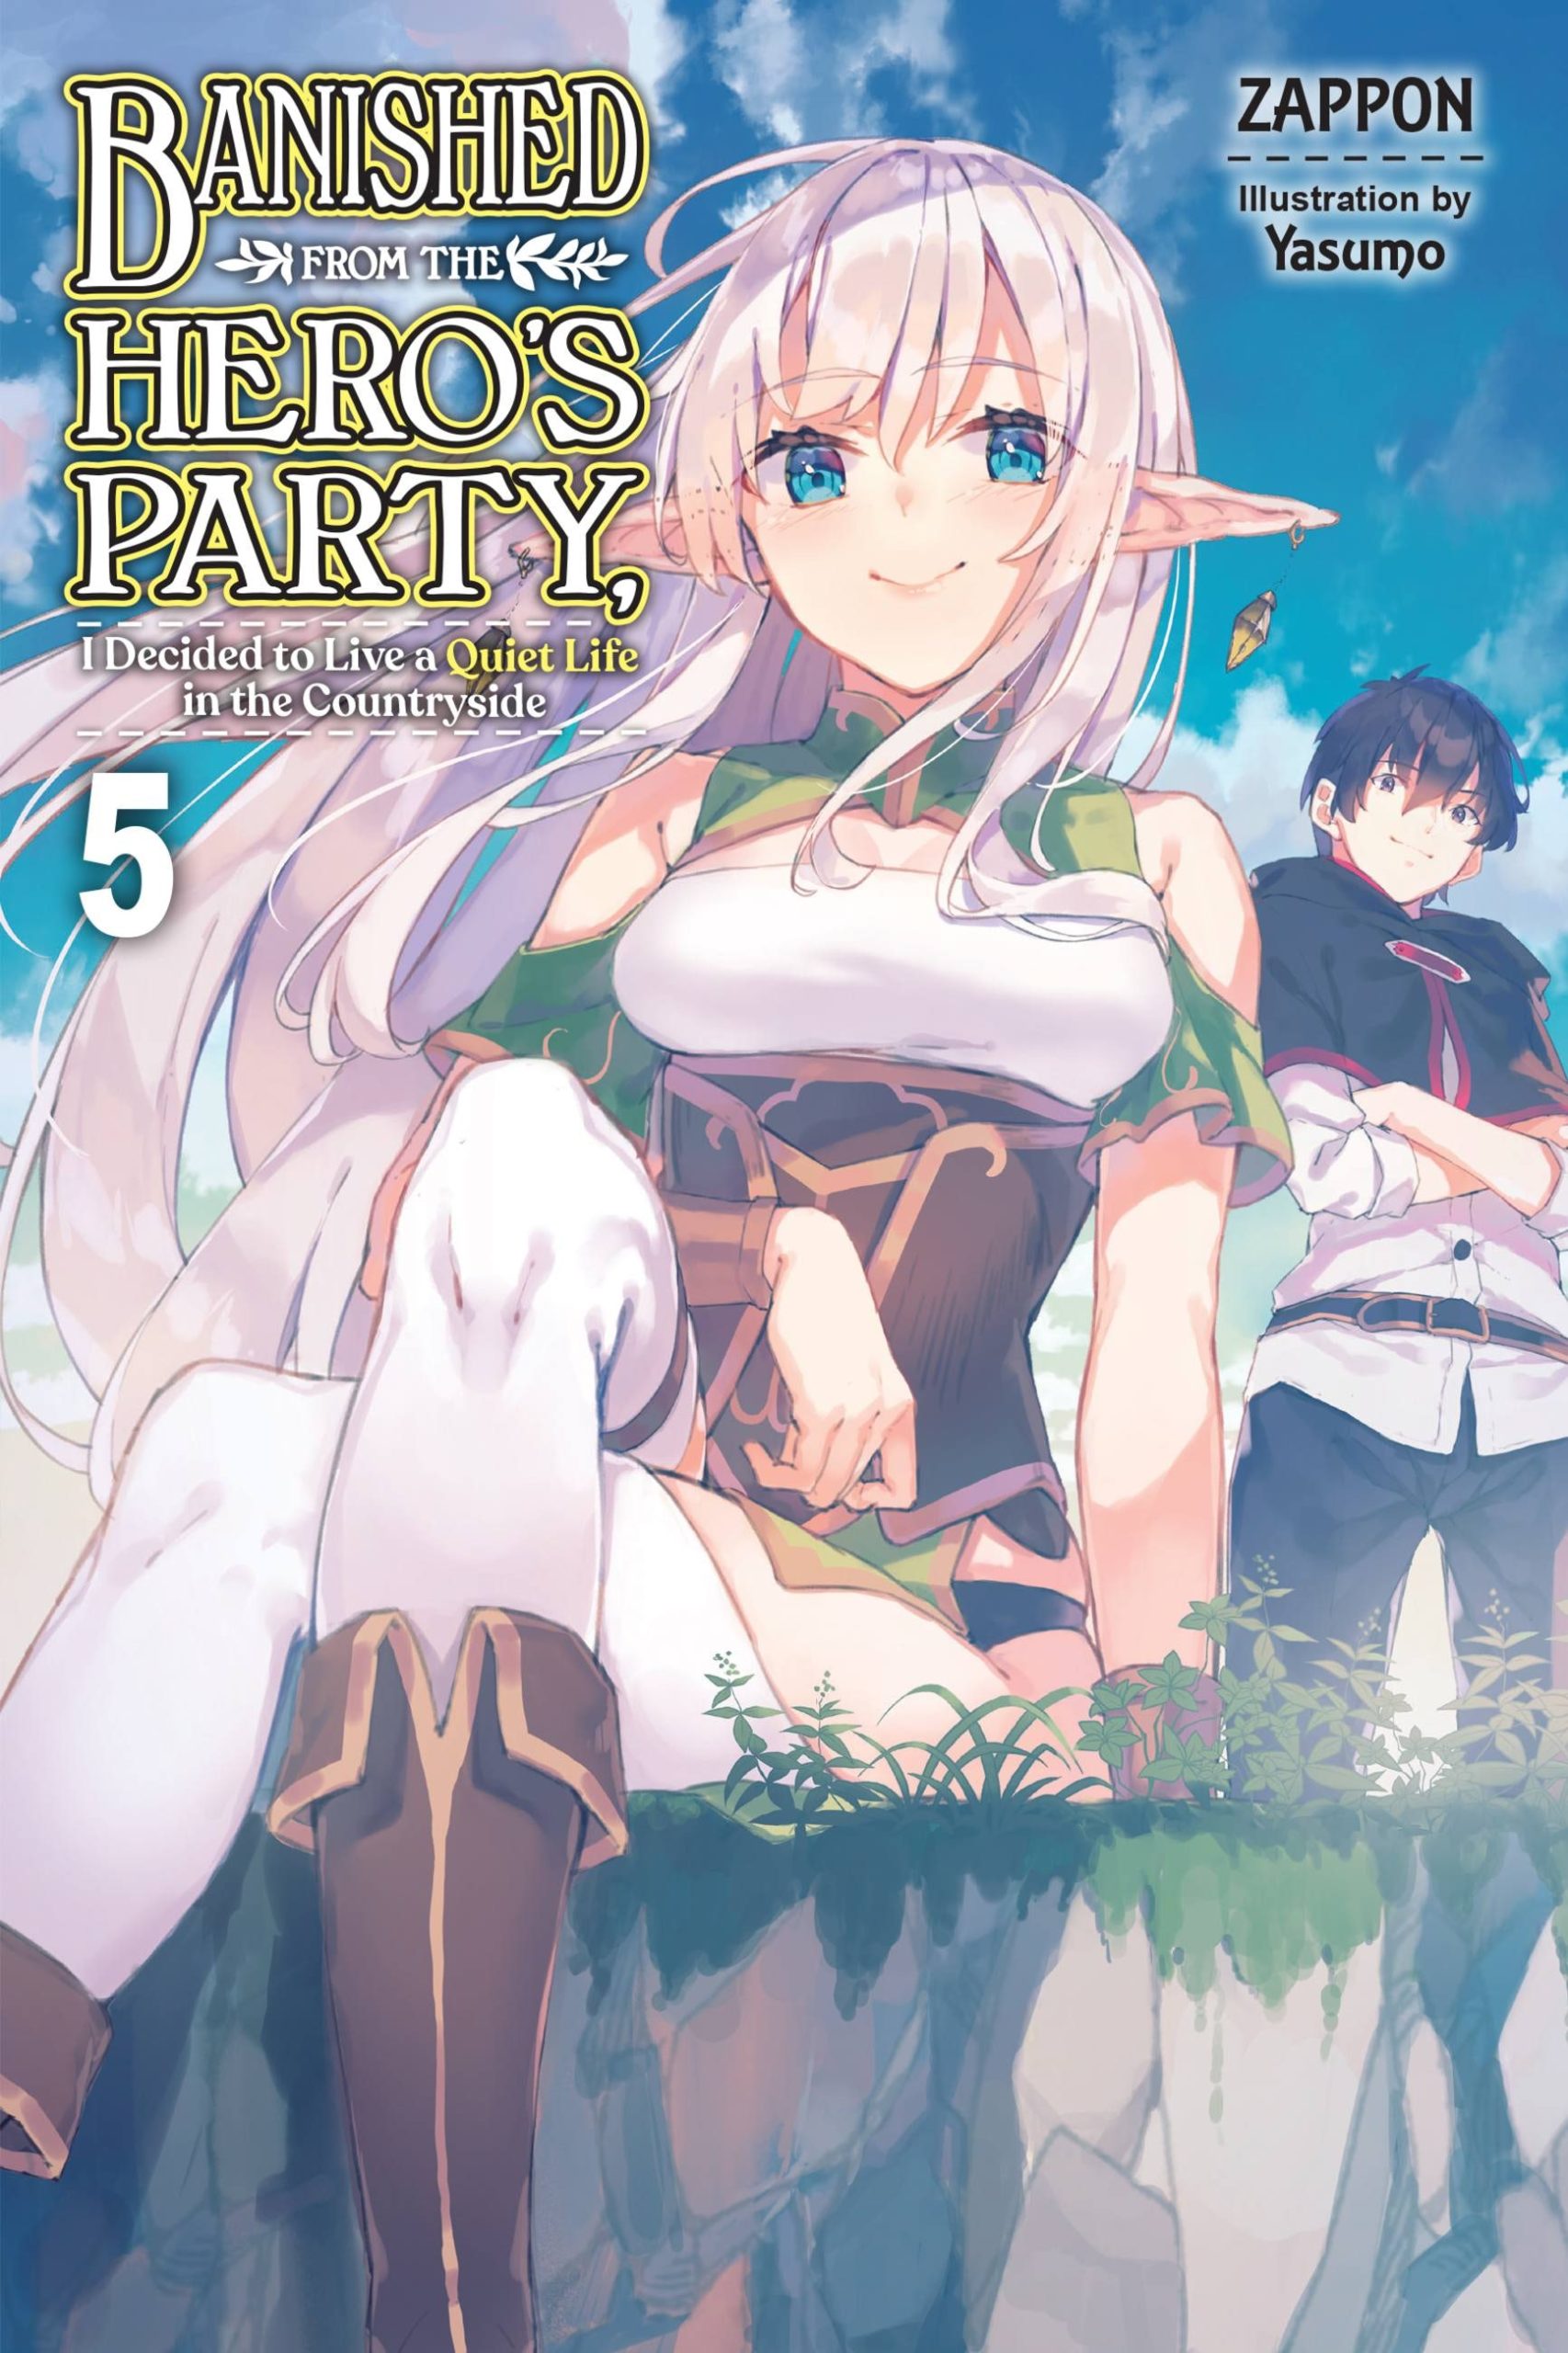 Banished From The Heros Party I Decided To Live A Quiet Life In The Countryside Volume 5 